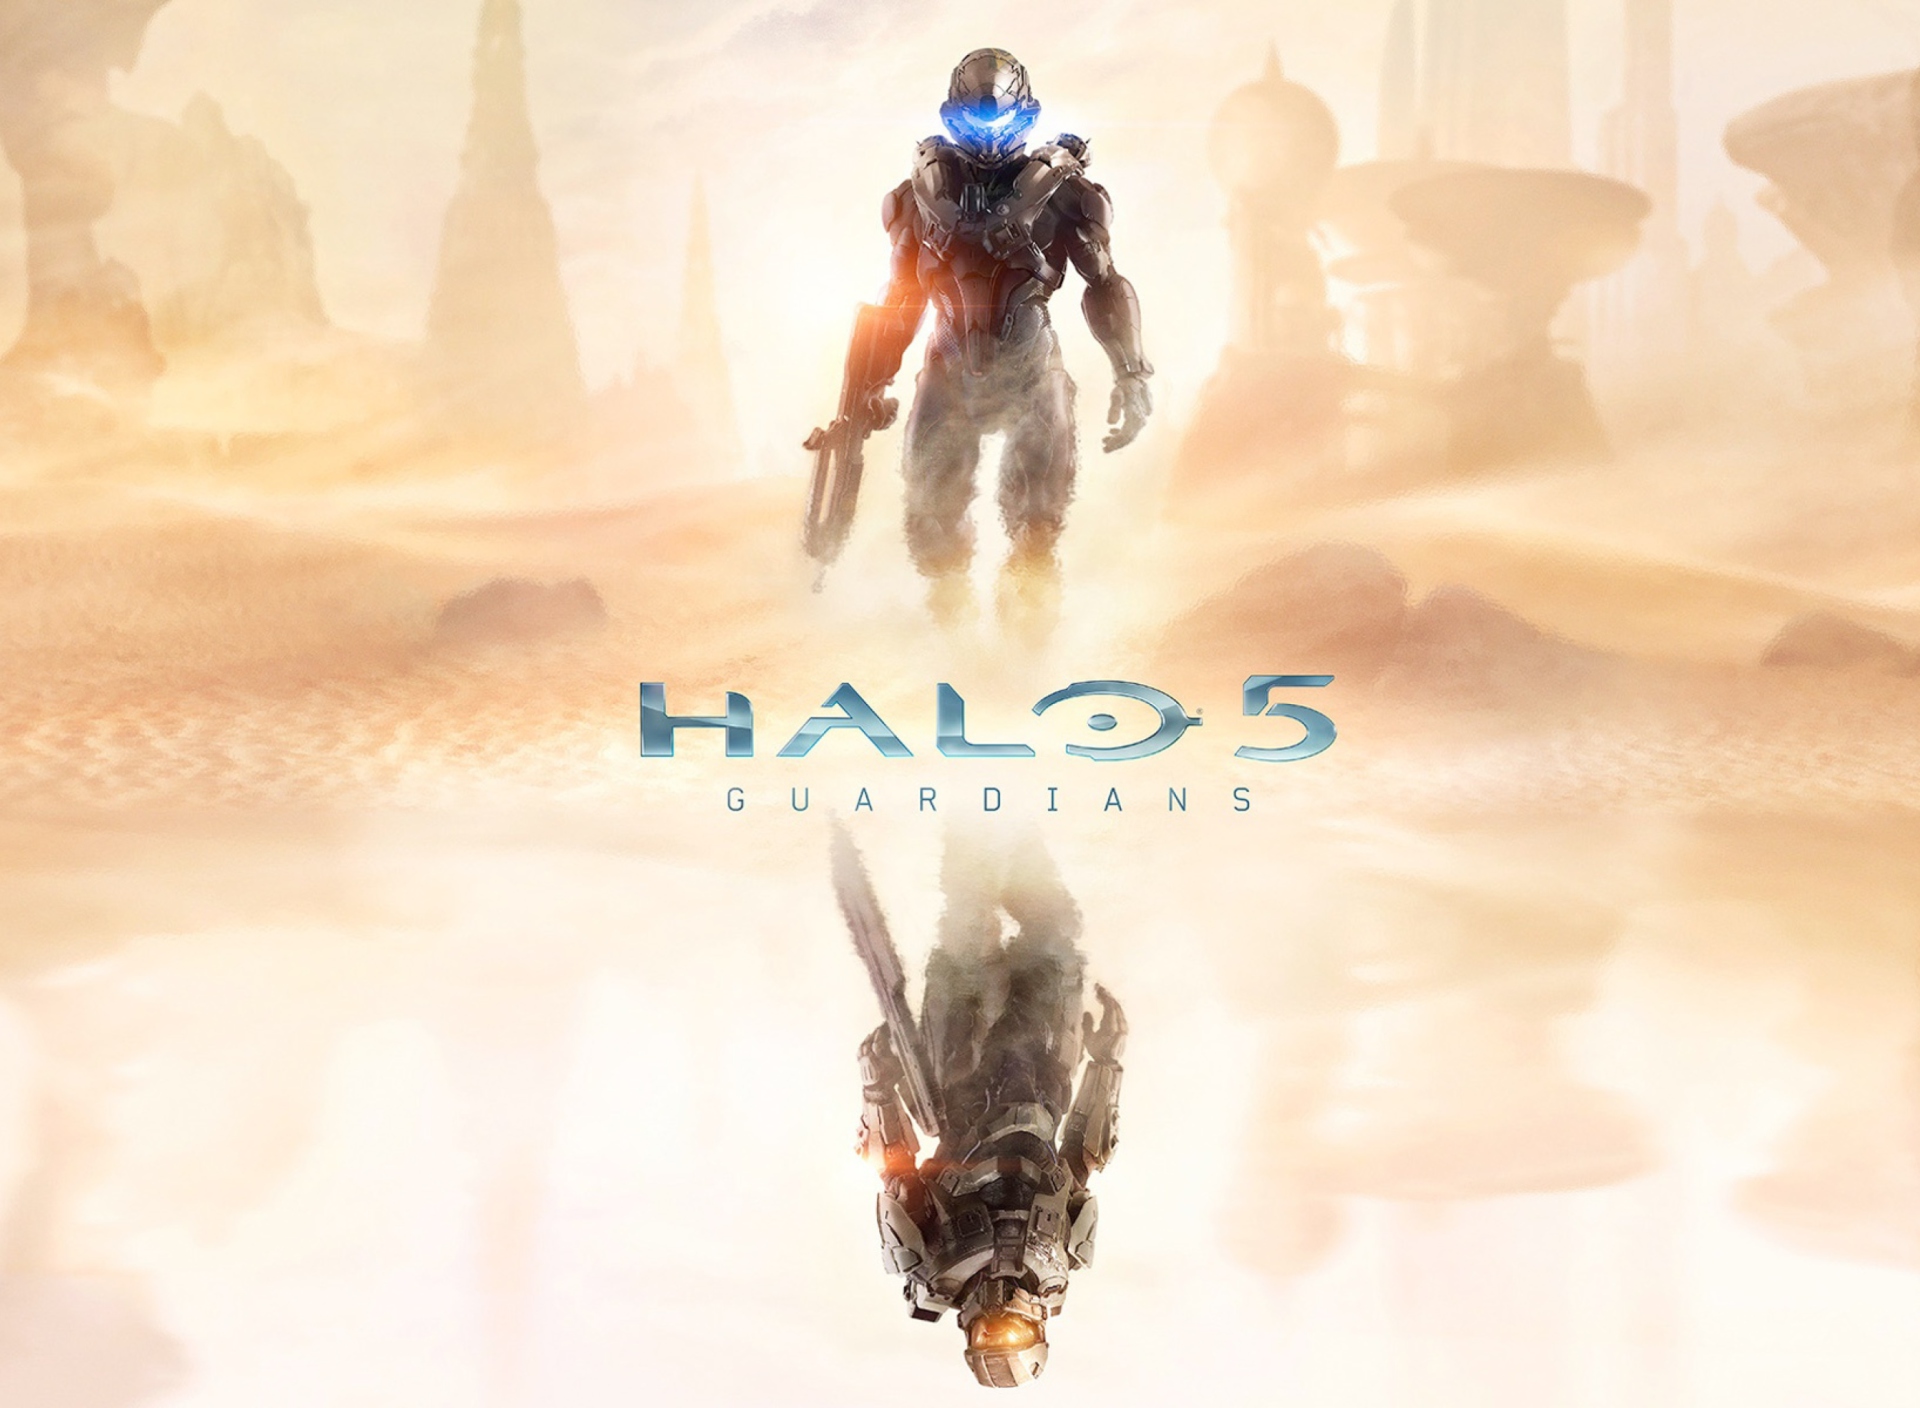 Halo 5 Guardians 2015 Game wallpaper 1920x1408